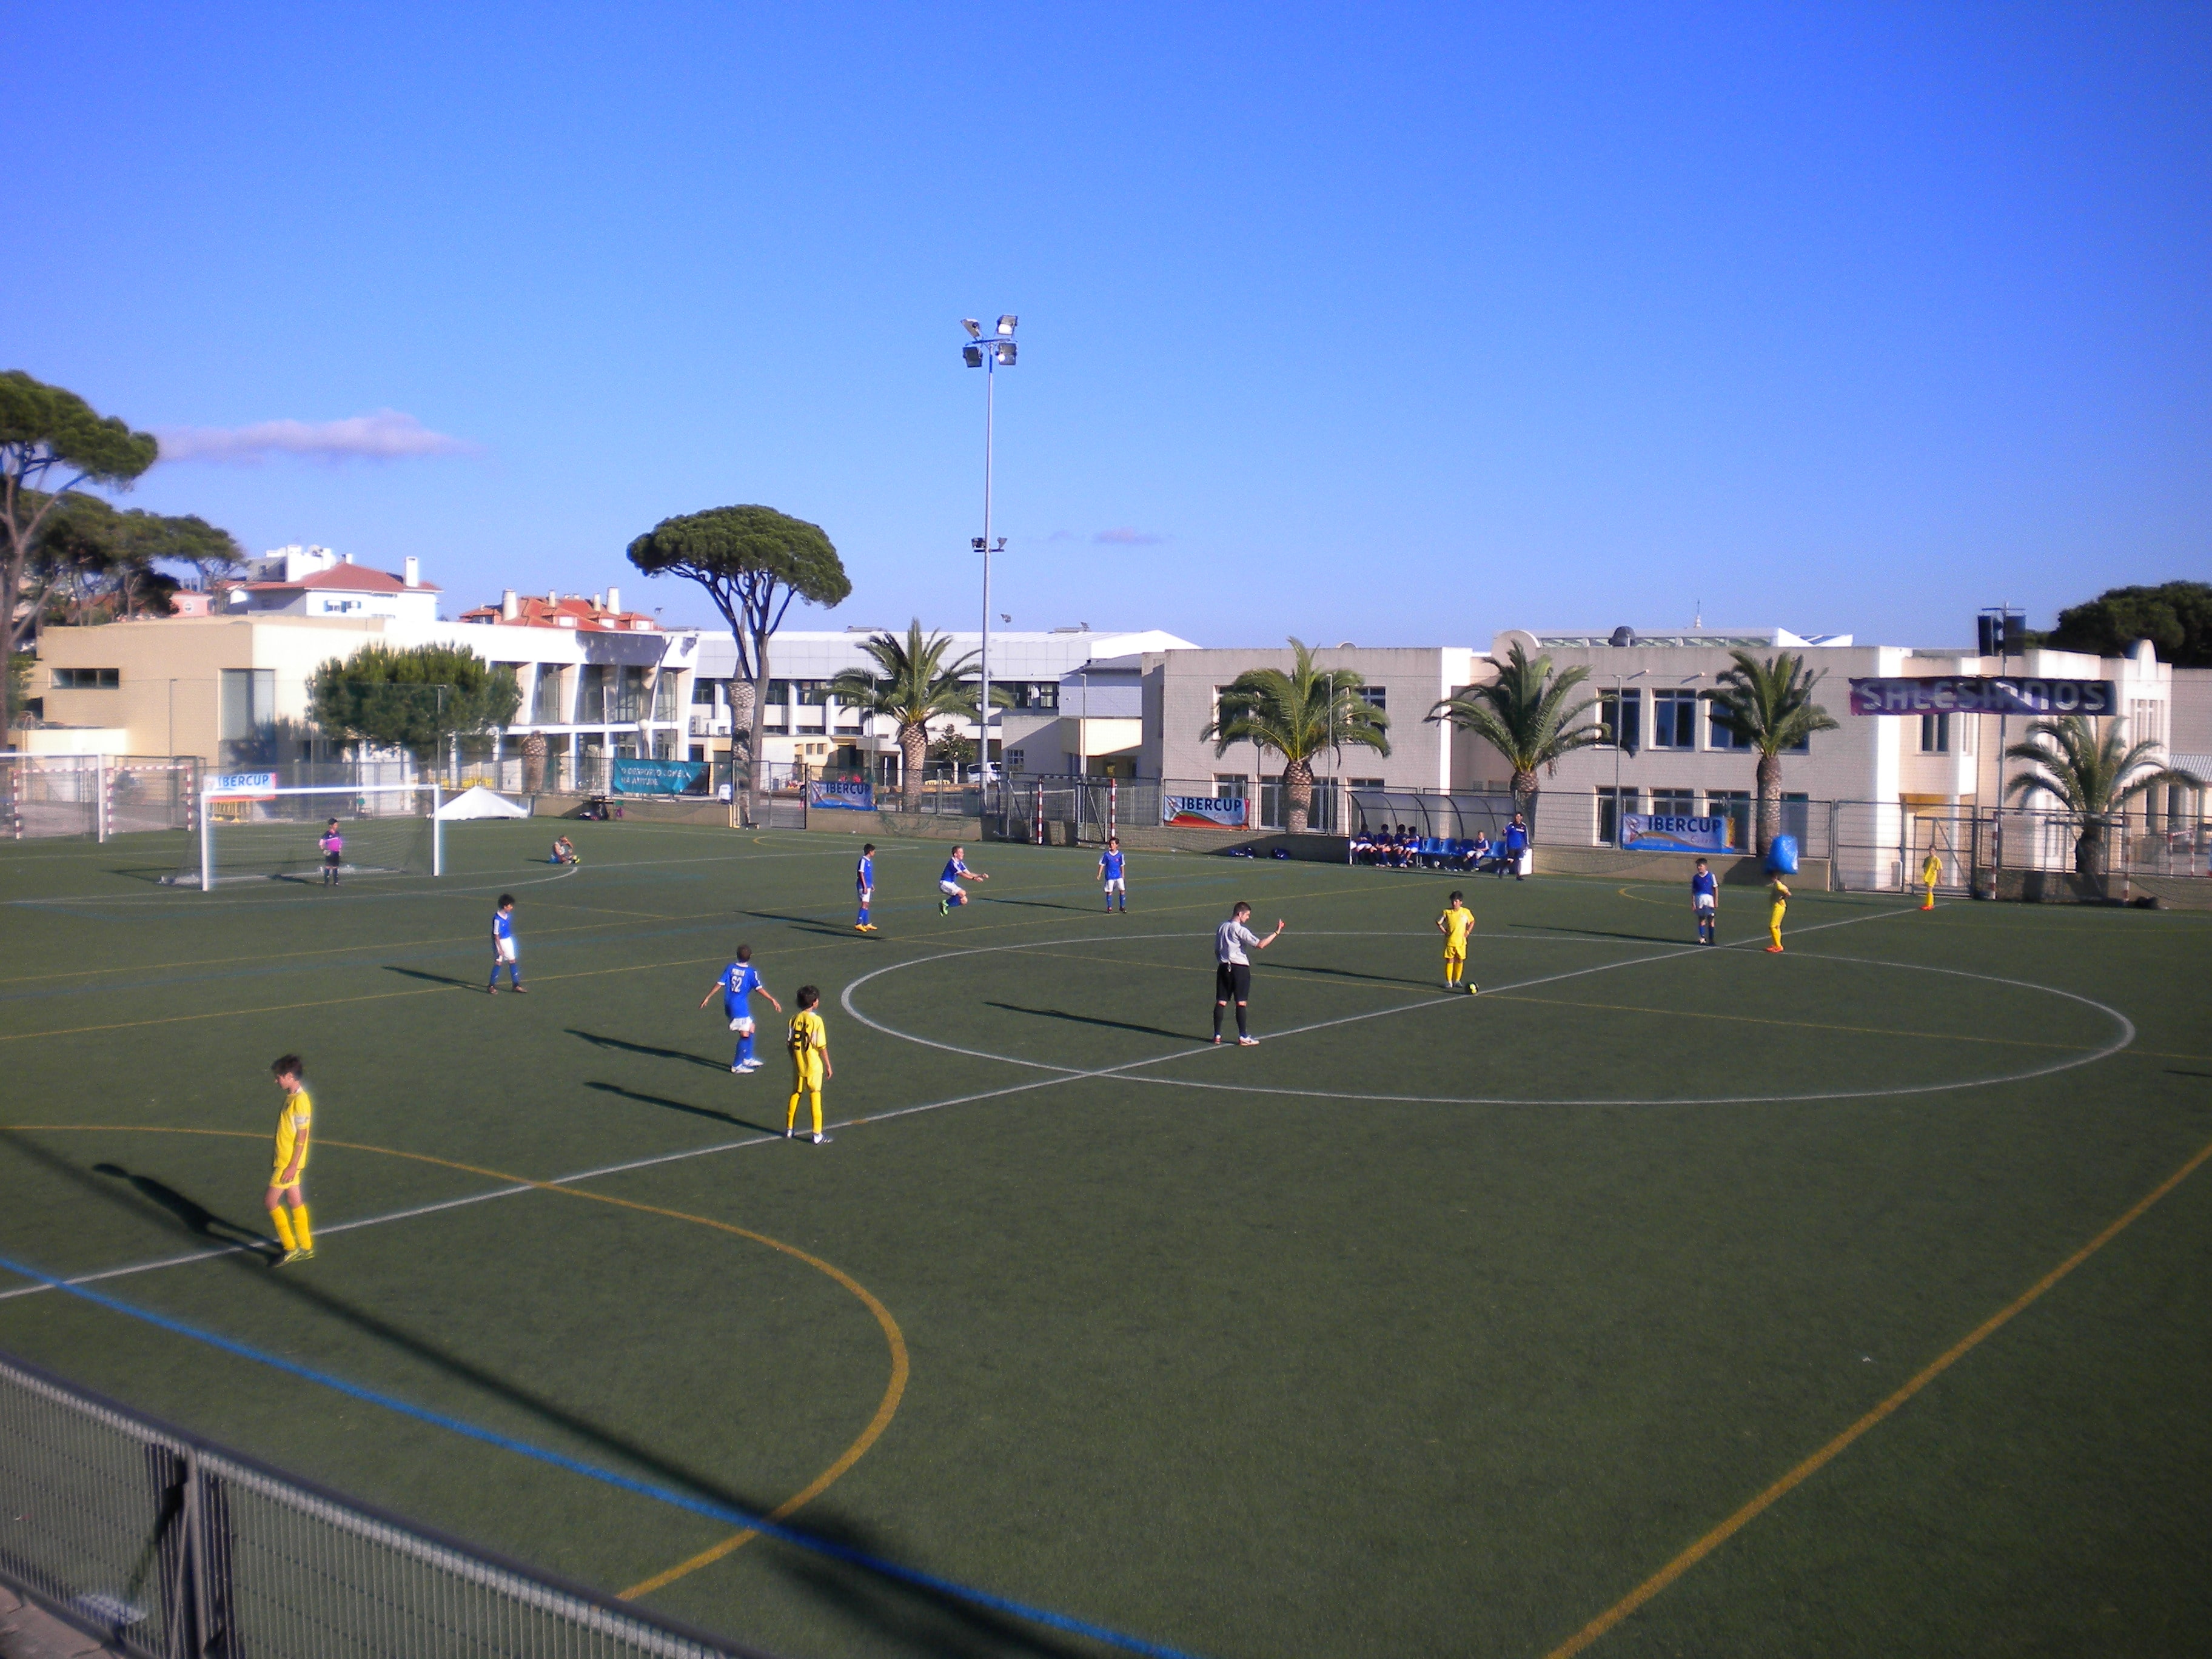 image of Brazil soccer USA professional soccer training sessions for schools